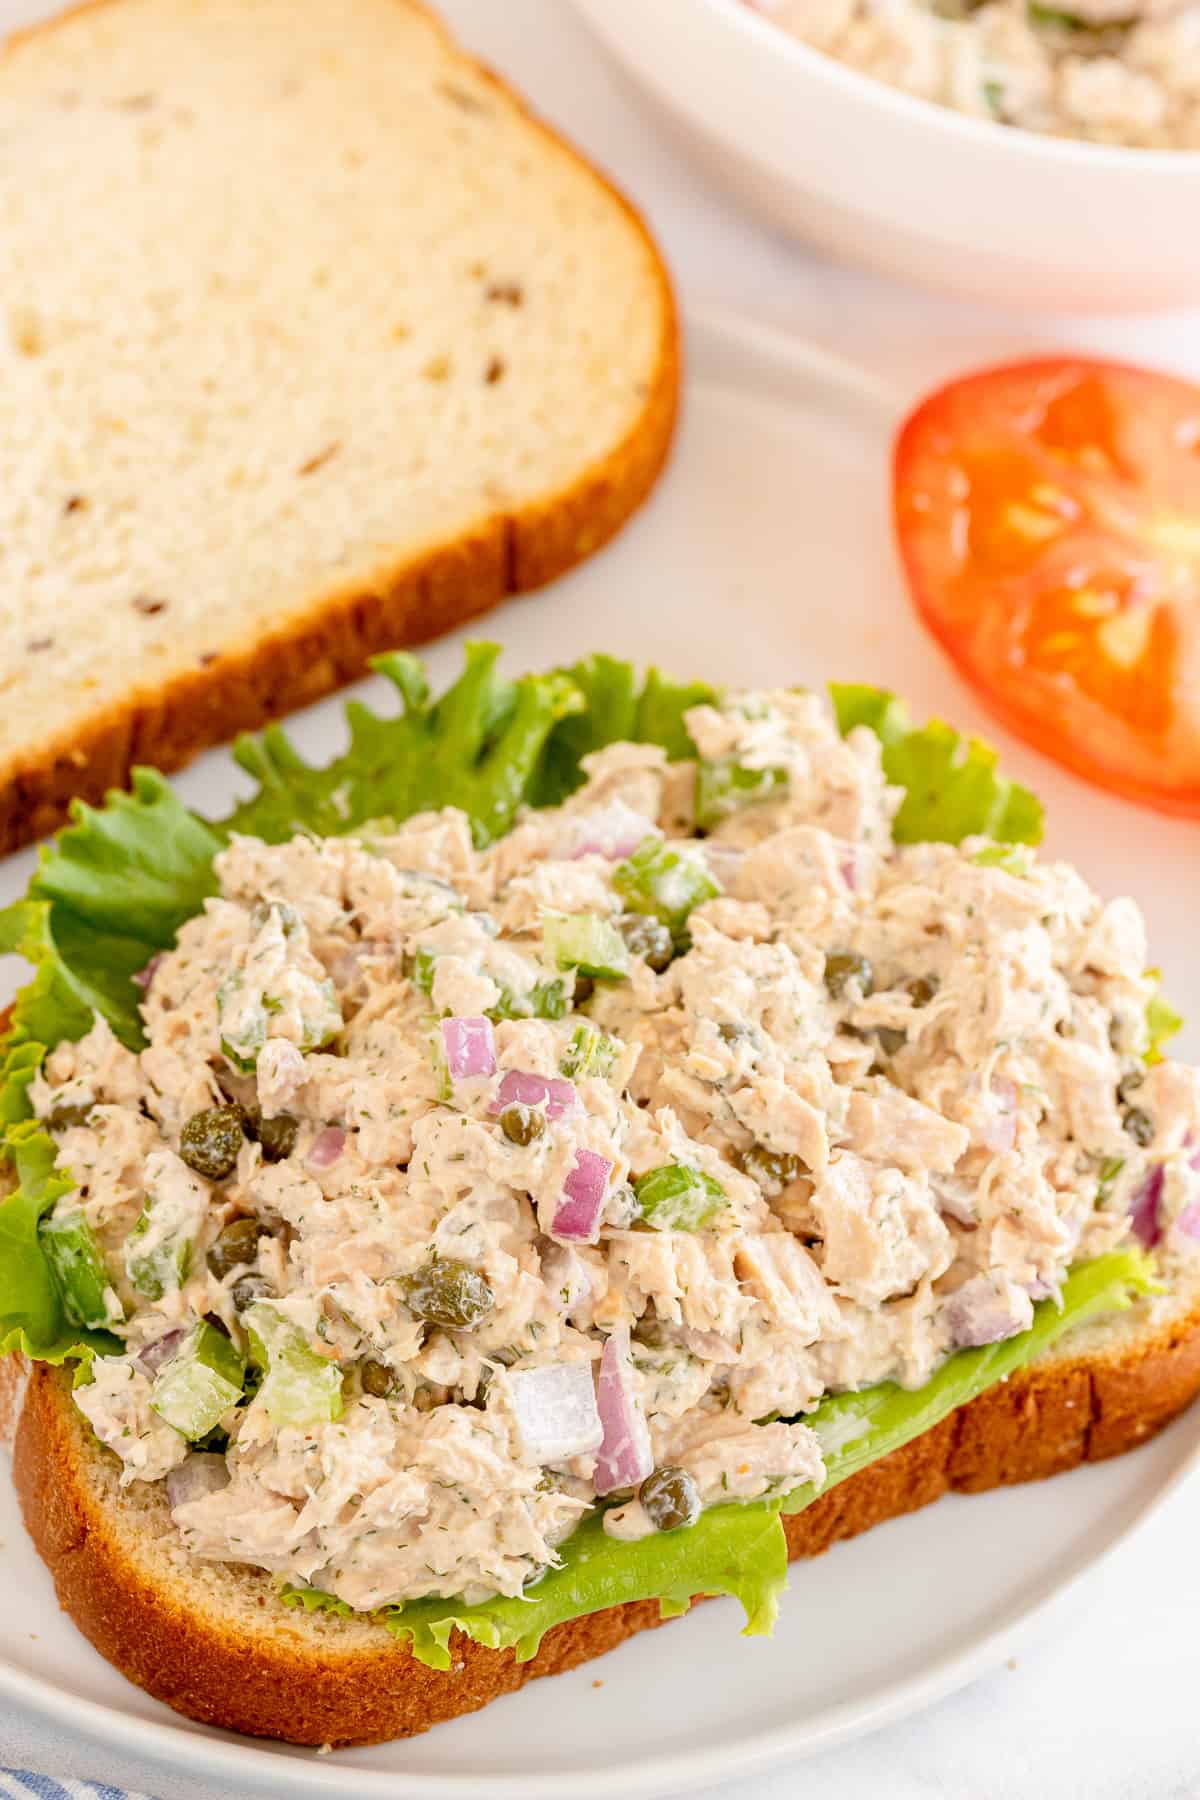 A slice of bread topped with lettuce and tuna salad.